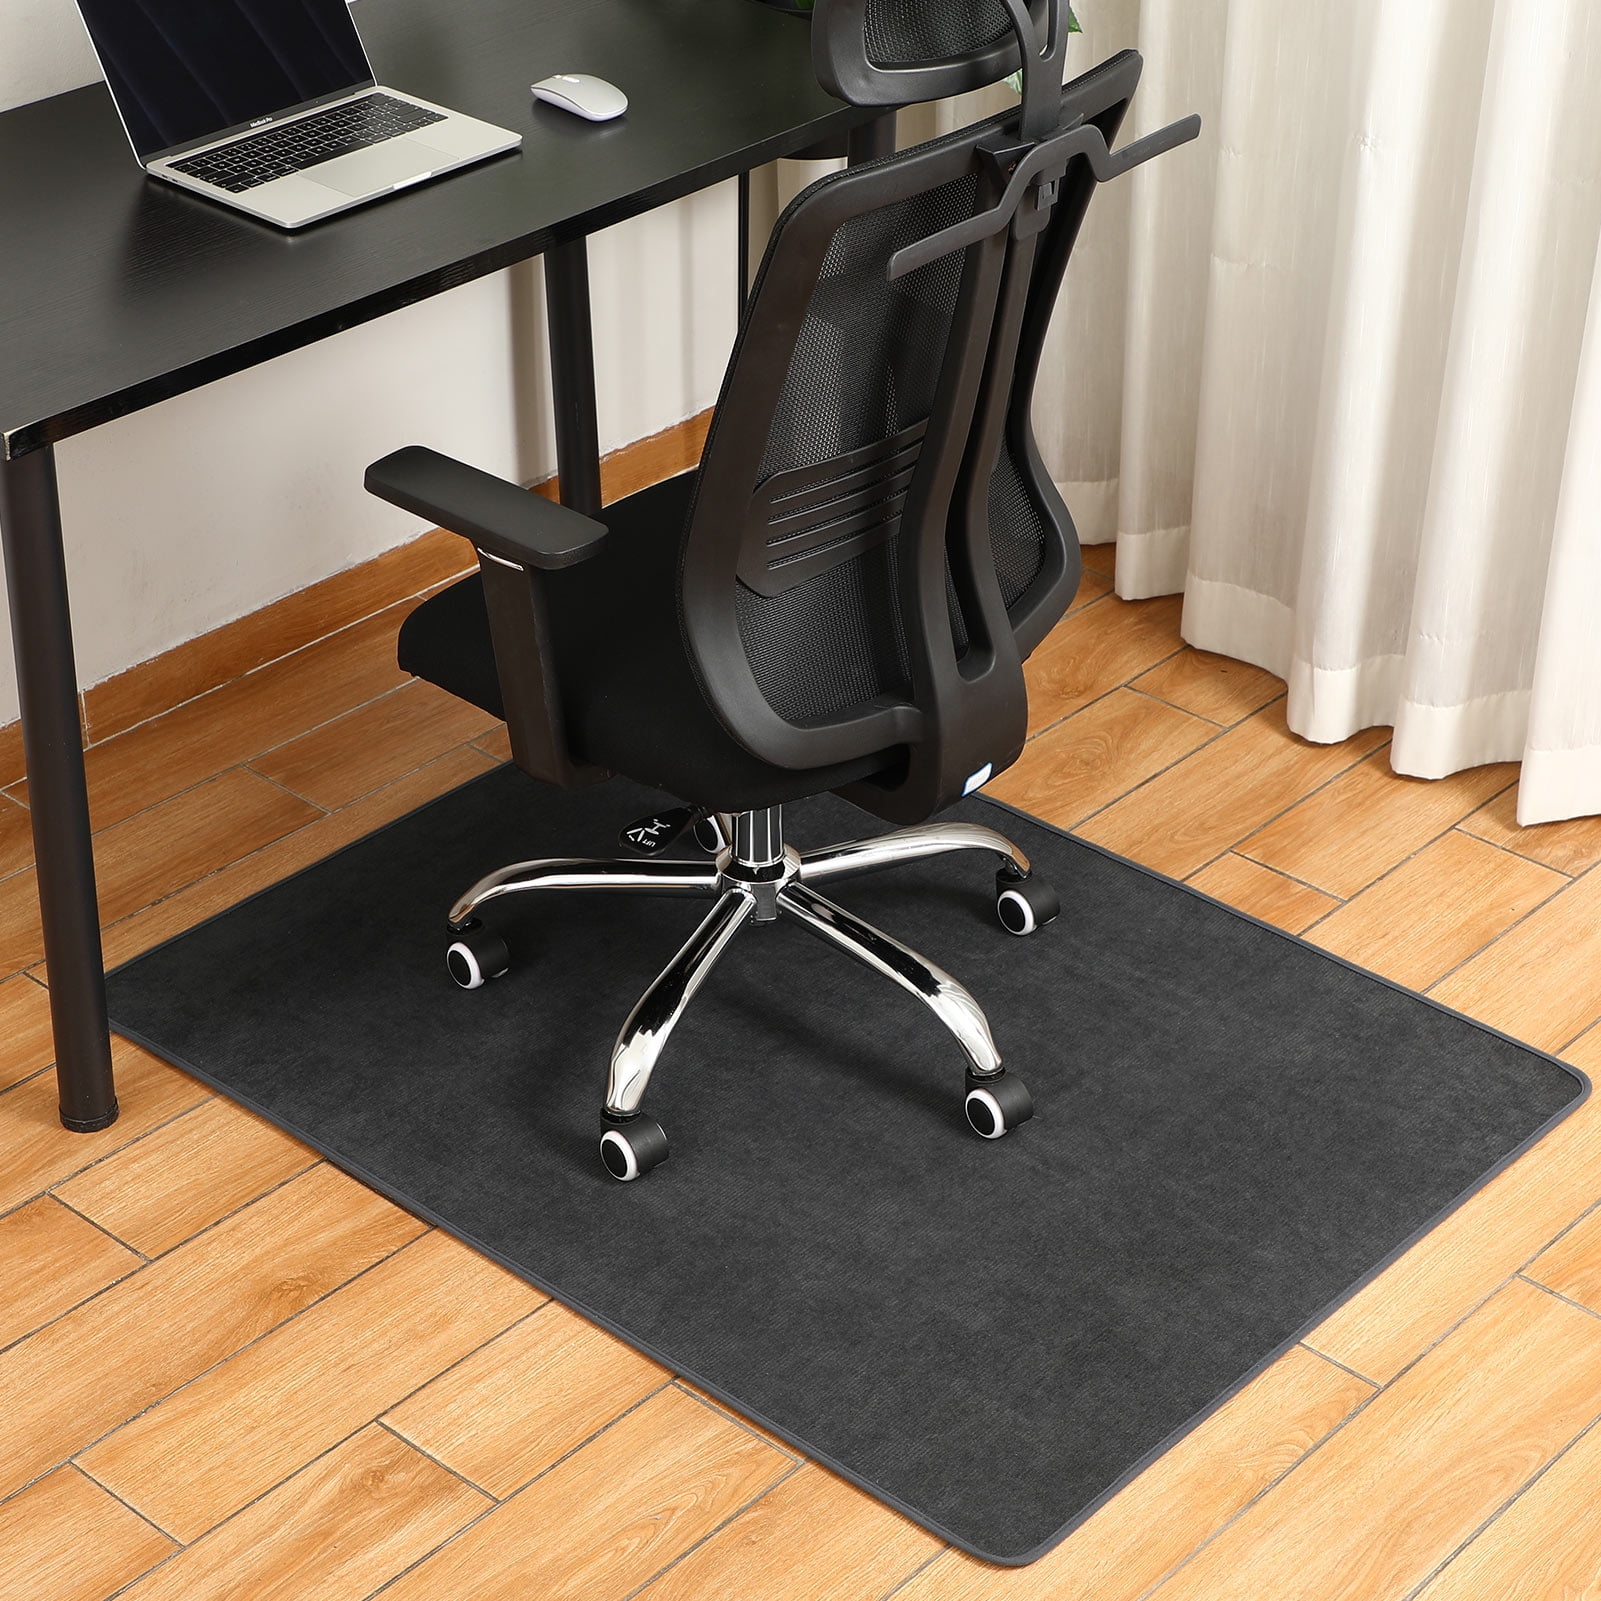 GTRACING Office Chair Mat for Hardwood Floor 43 x 35 inch Gaming Computer Desk Floor Mat Desk Chair Protector for Rolling Chair Red 